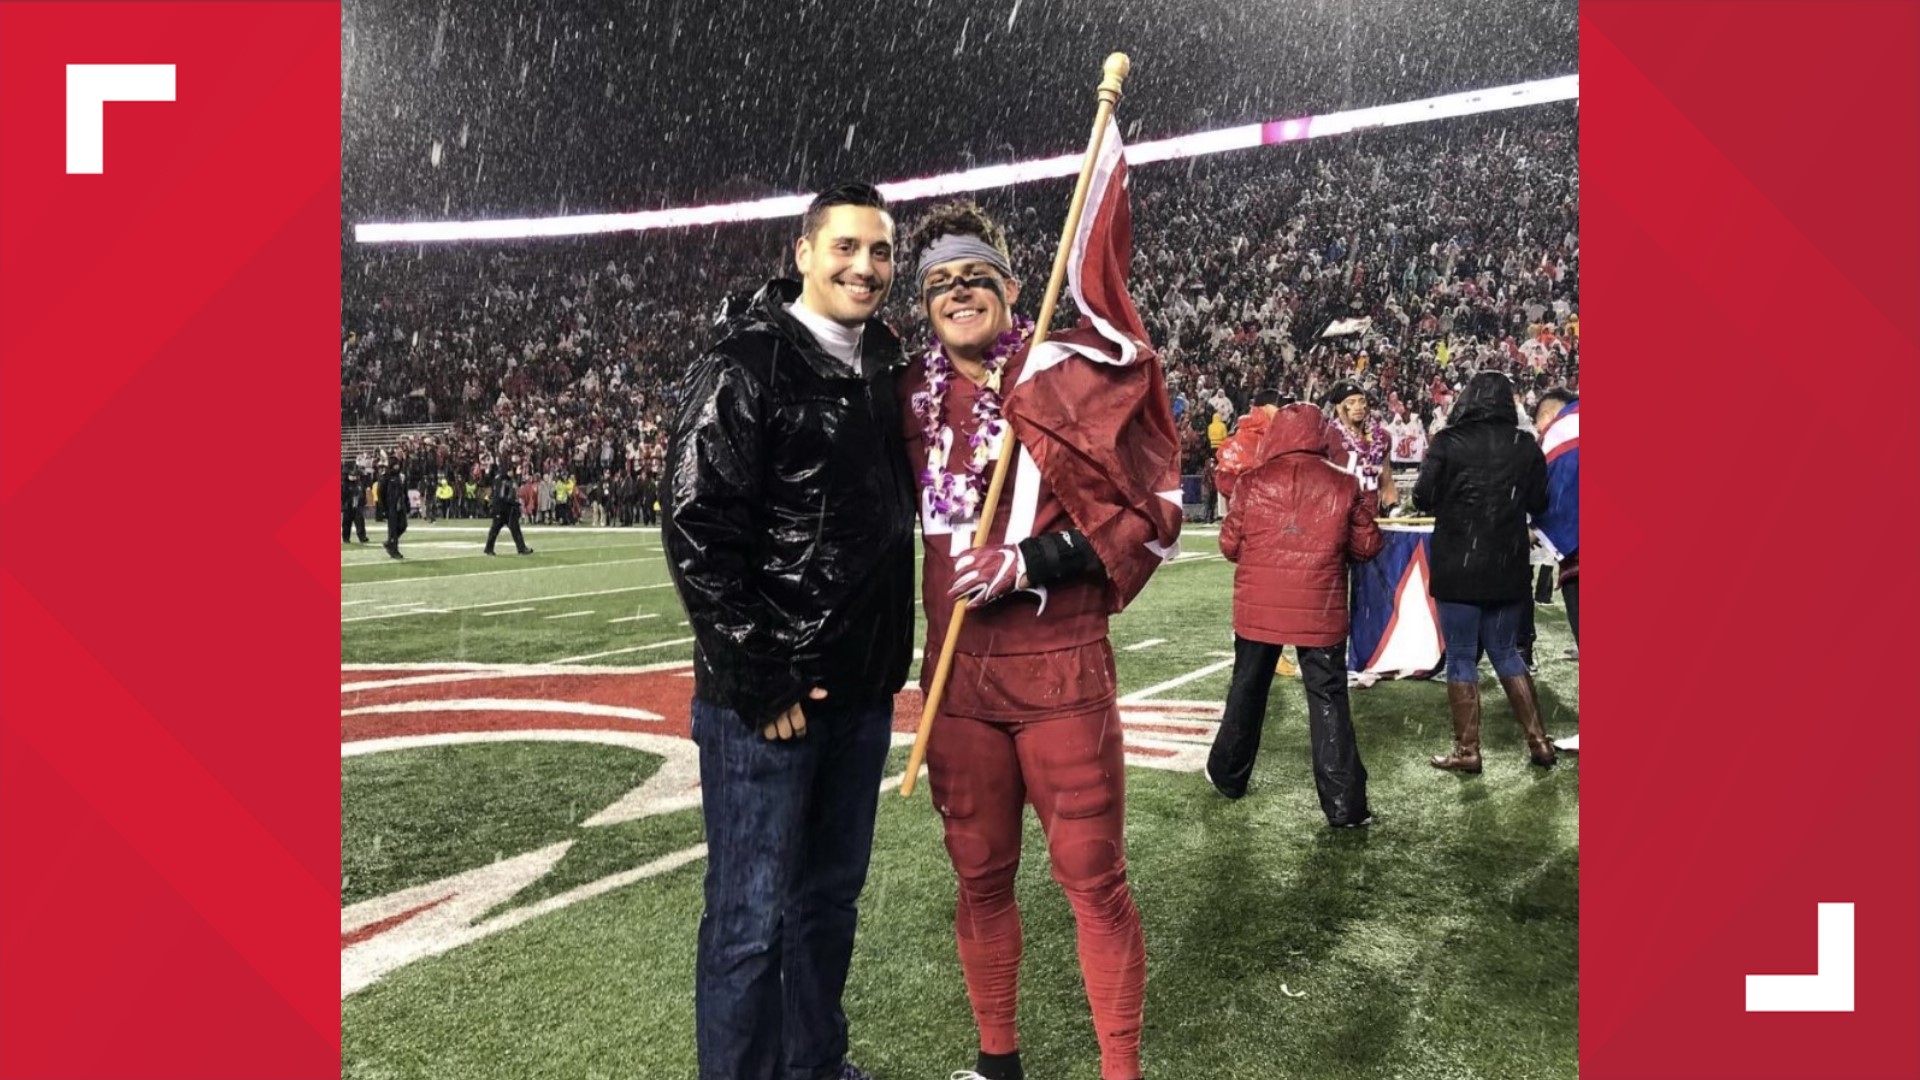 The two brothers played on opposite side of the rivalry. Cooper played for the Huskies until 2012. Peyton's final season with the Cougs was in 2018.